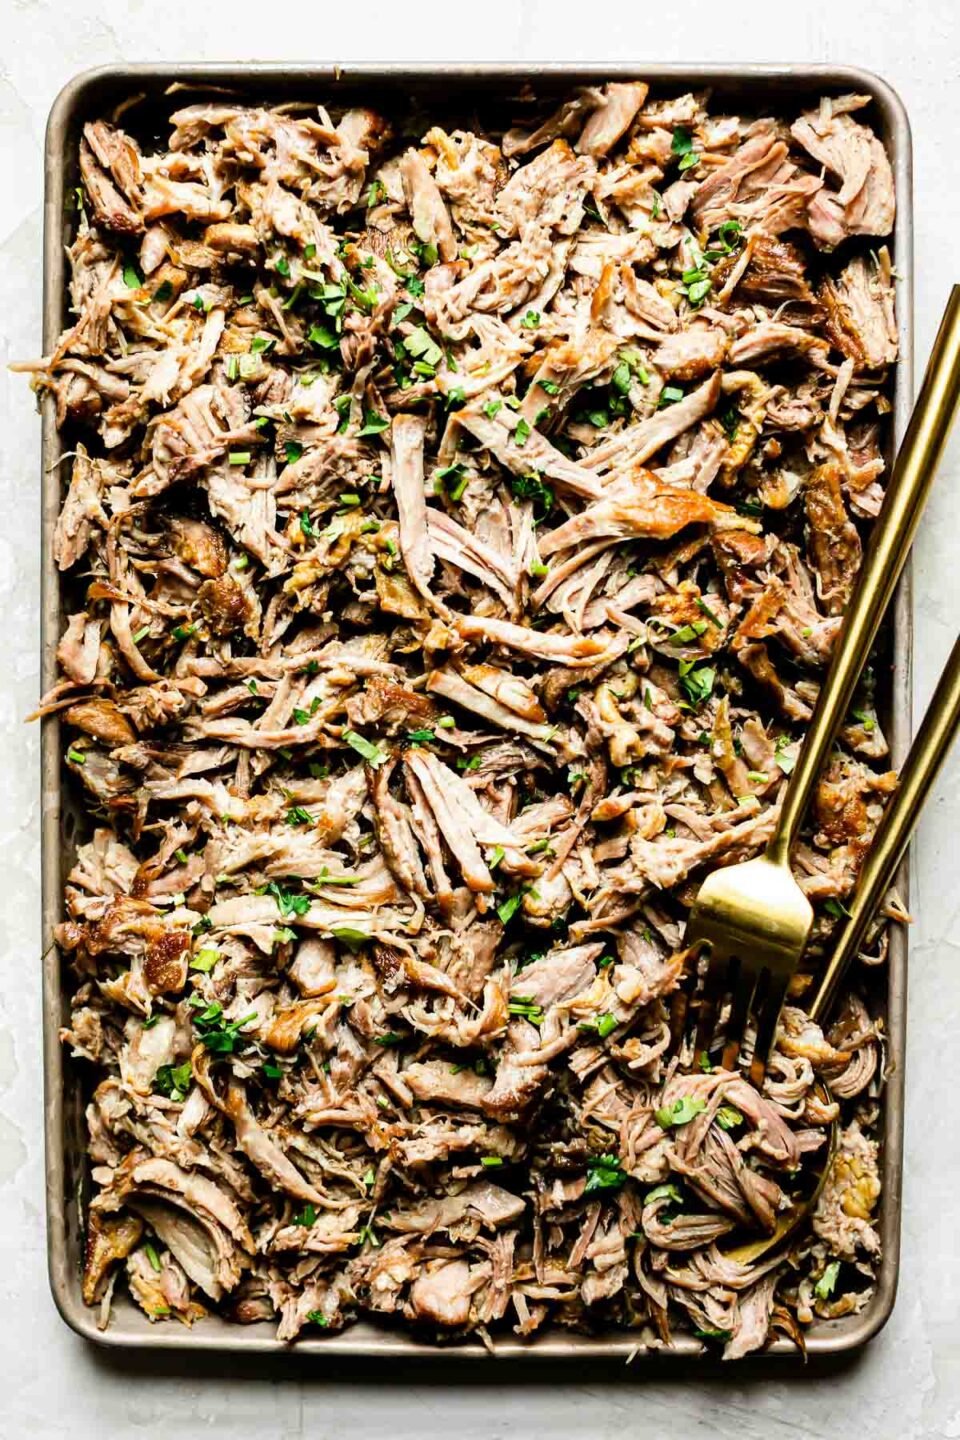 Shredded pork on a small baking sheet, topped with cilantro with a gold serving fork and spoon.